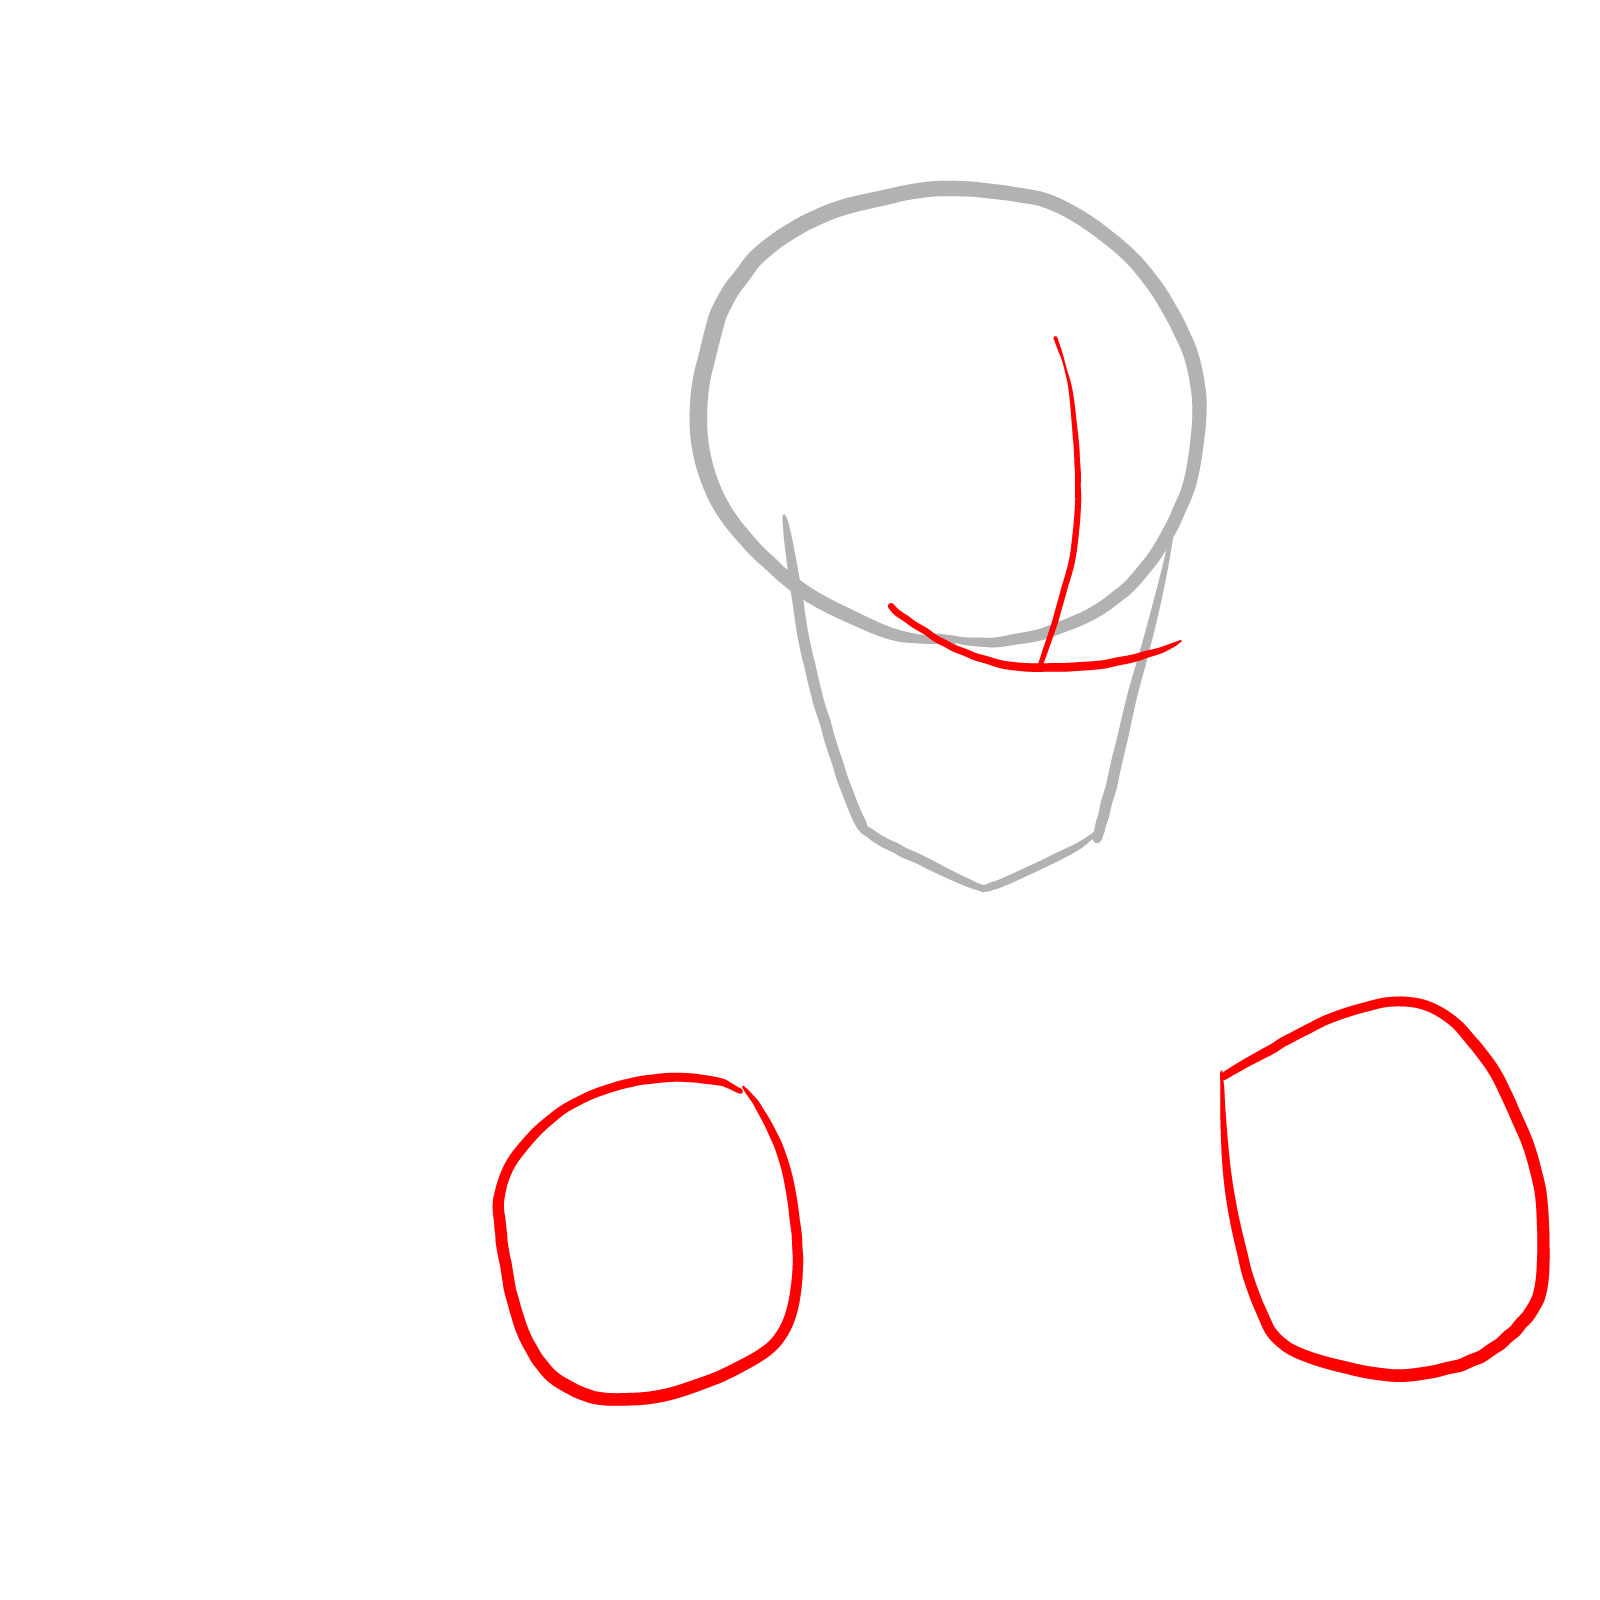 How to draw Phantom!Papyrus from FNF - step 02